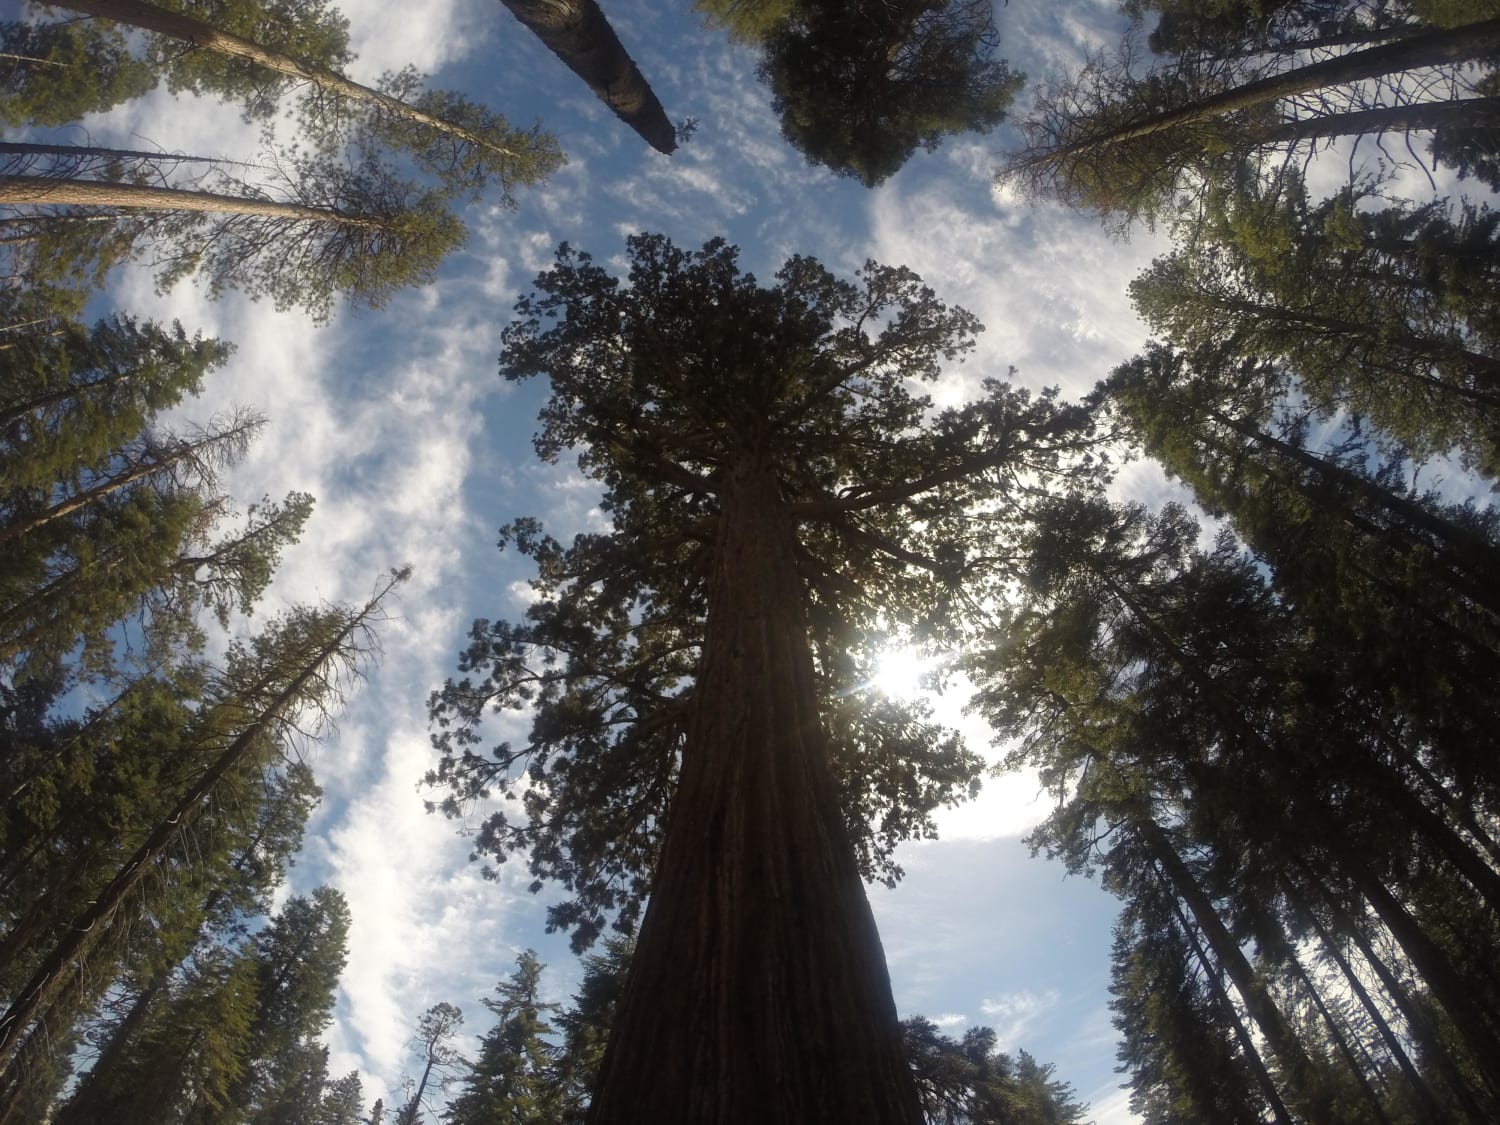 Looking up at a Sequoia, Yosemite National Park.